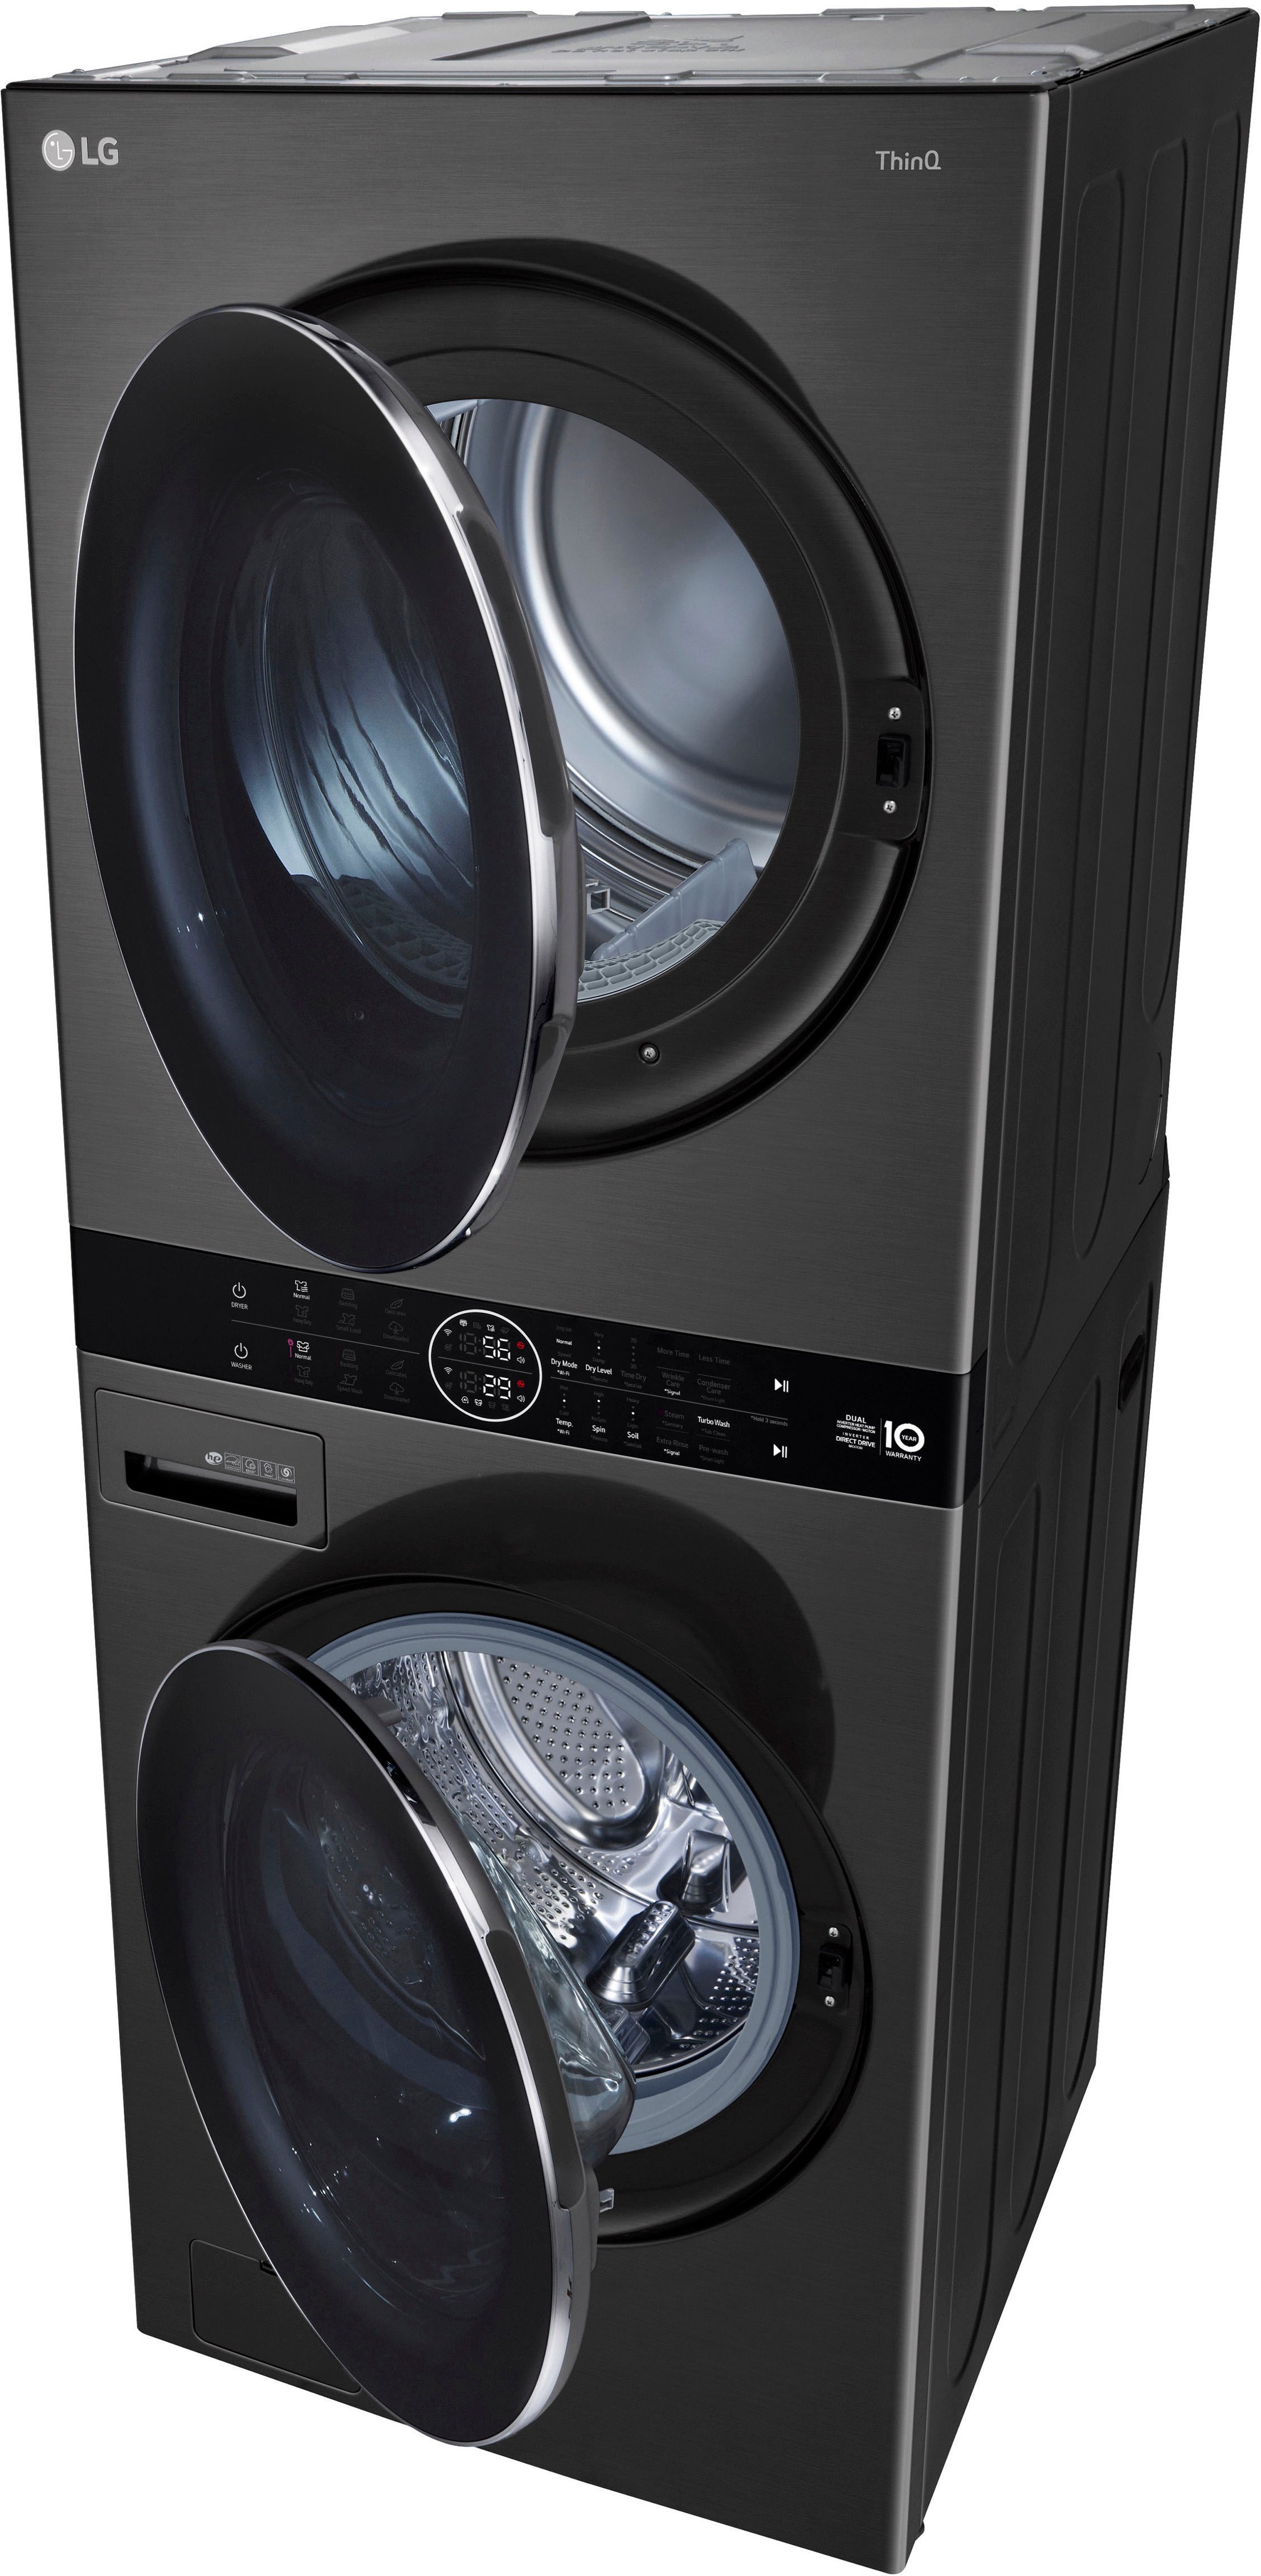 Black Load LG Ventless and 4.5 Smart Cu. 7.4 Best Washer - Buy WKHC202HBA Dryer Dryer with Front Ft. Steam Ft. WashTower Cu. HE and Electric Steel